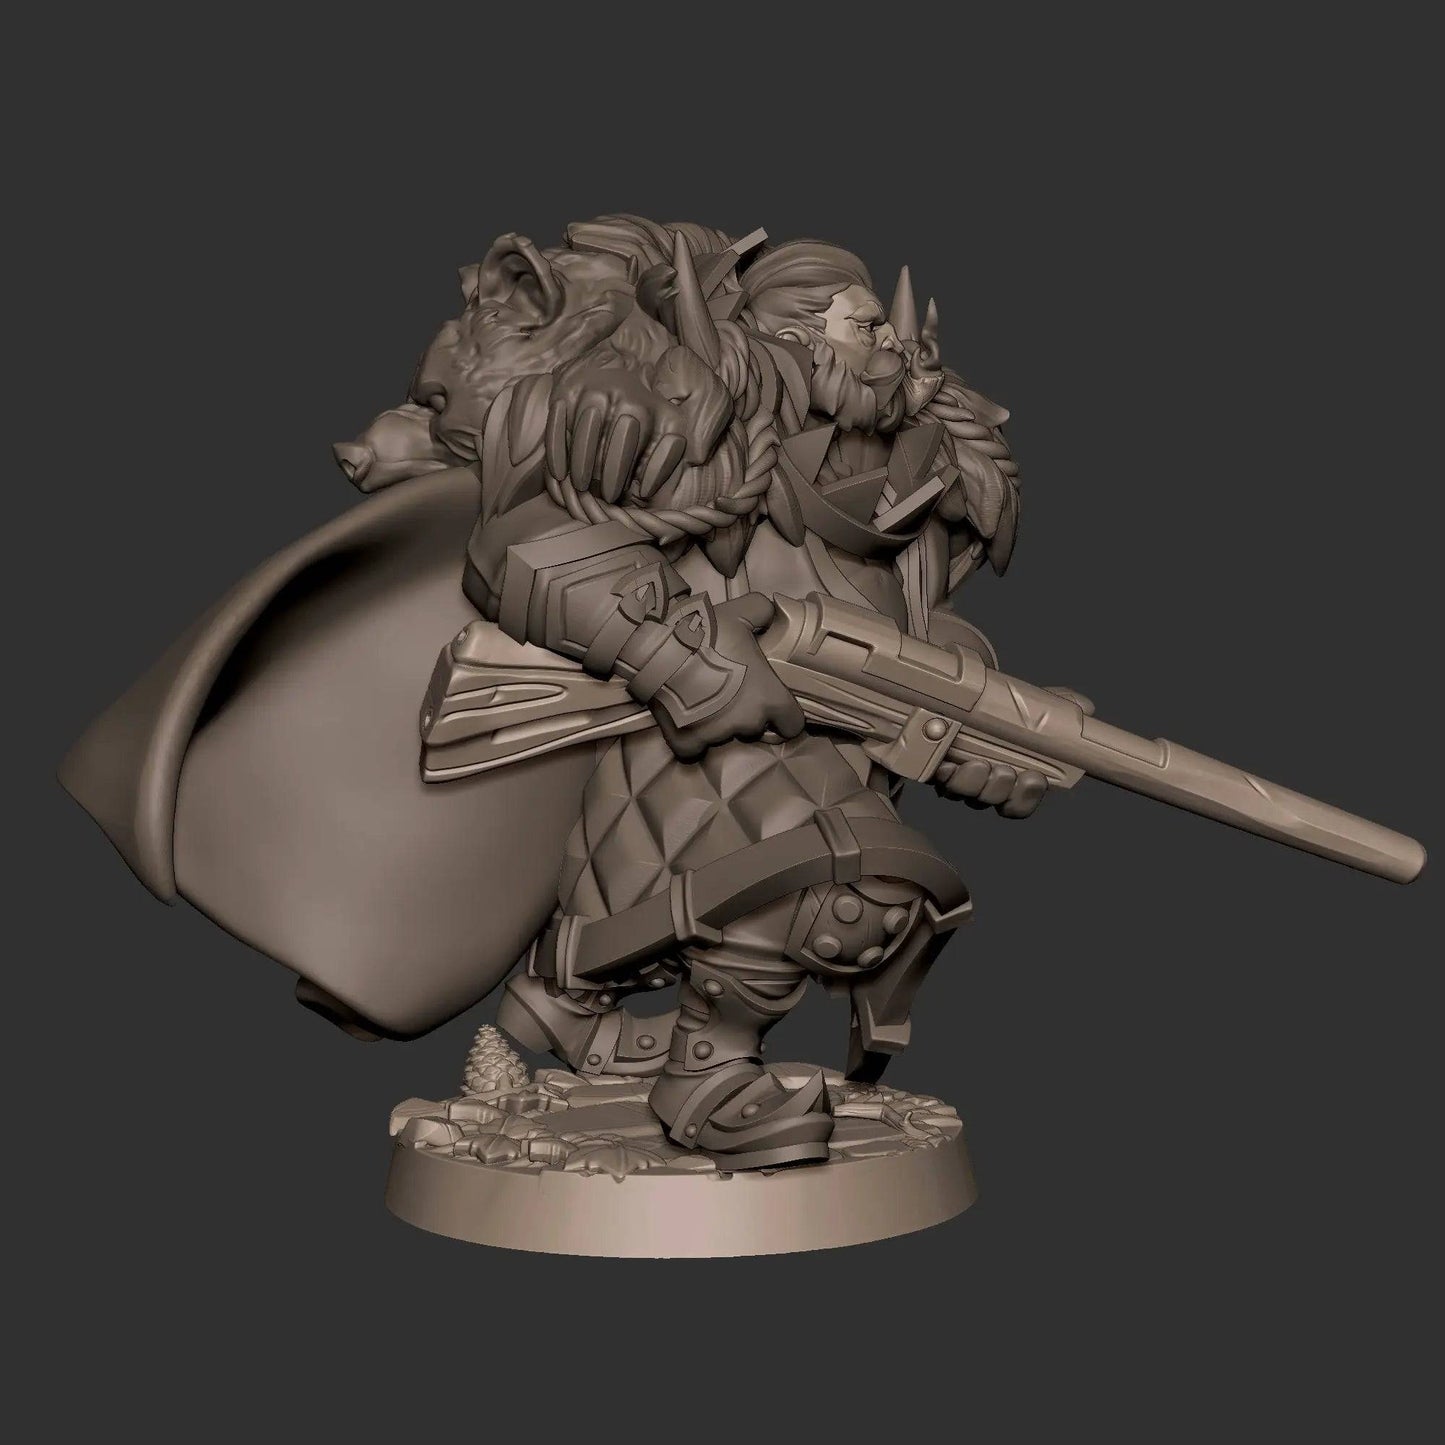 Alex, Chubby Hunter Ranger Cigar with Crossbow or Rifle | D&D Miniature TTRPG Character | Bite the Bullet - Tattles Told 3D